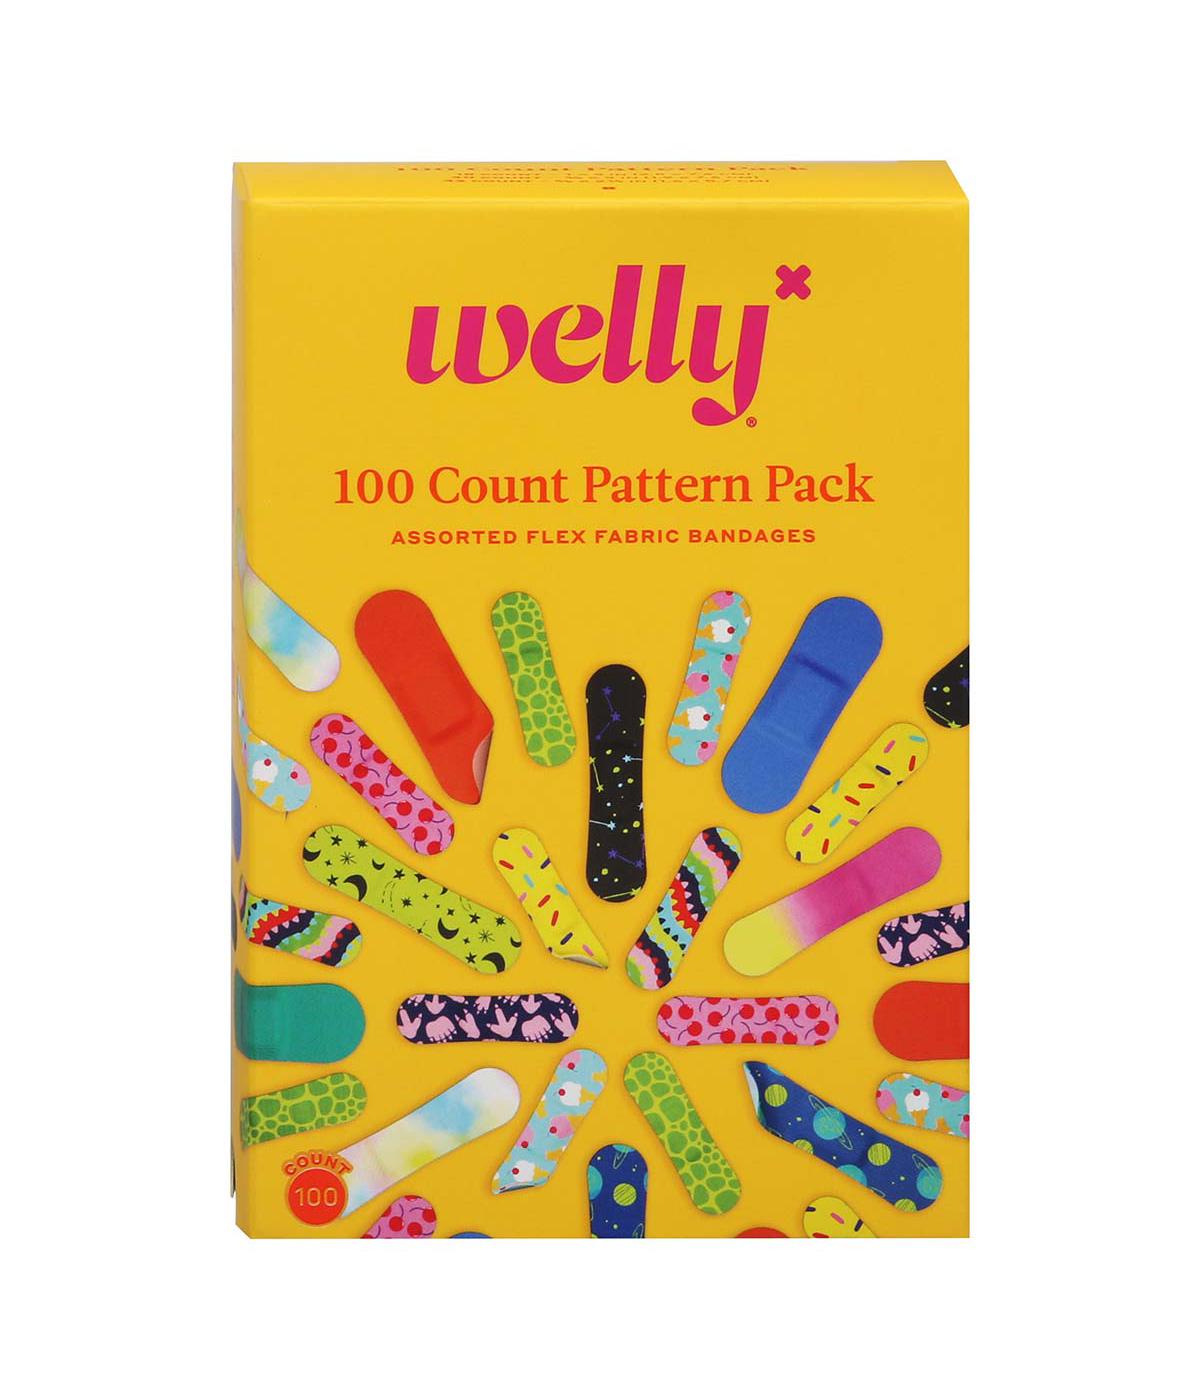 Welly Flex Fabric Pattern Pack Bandages; image 1 of 3